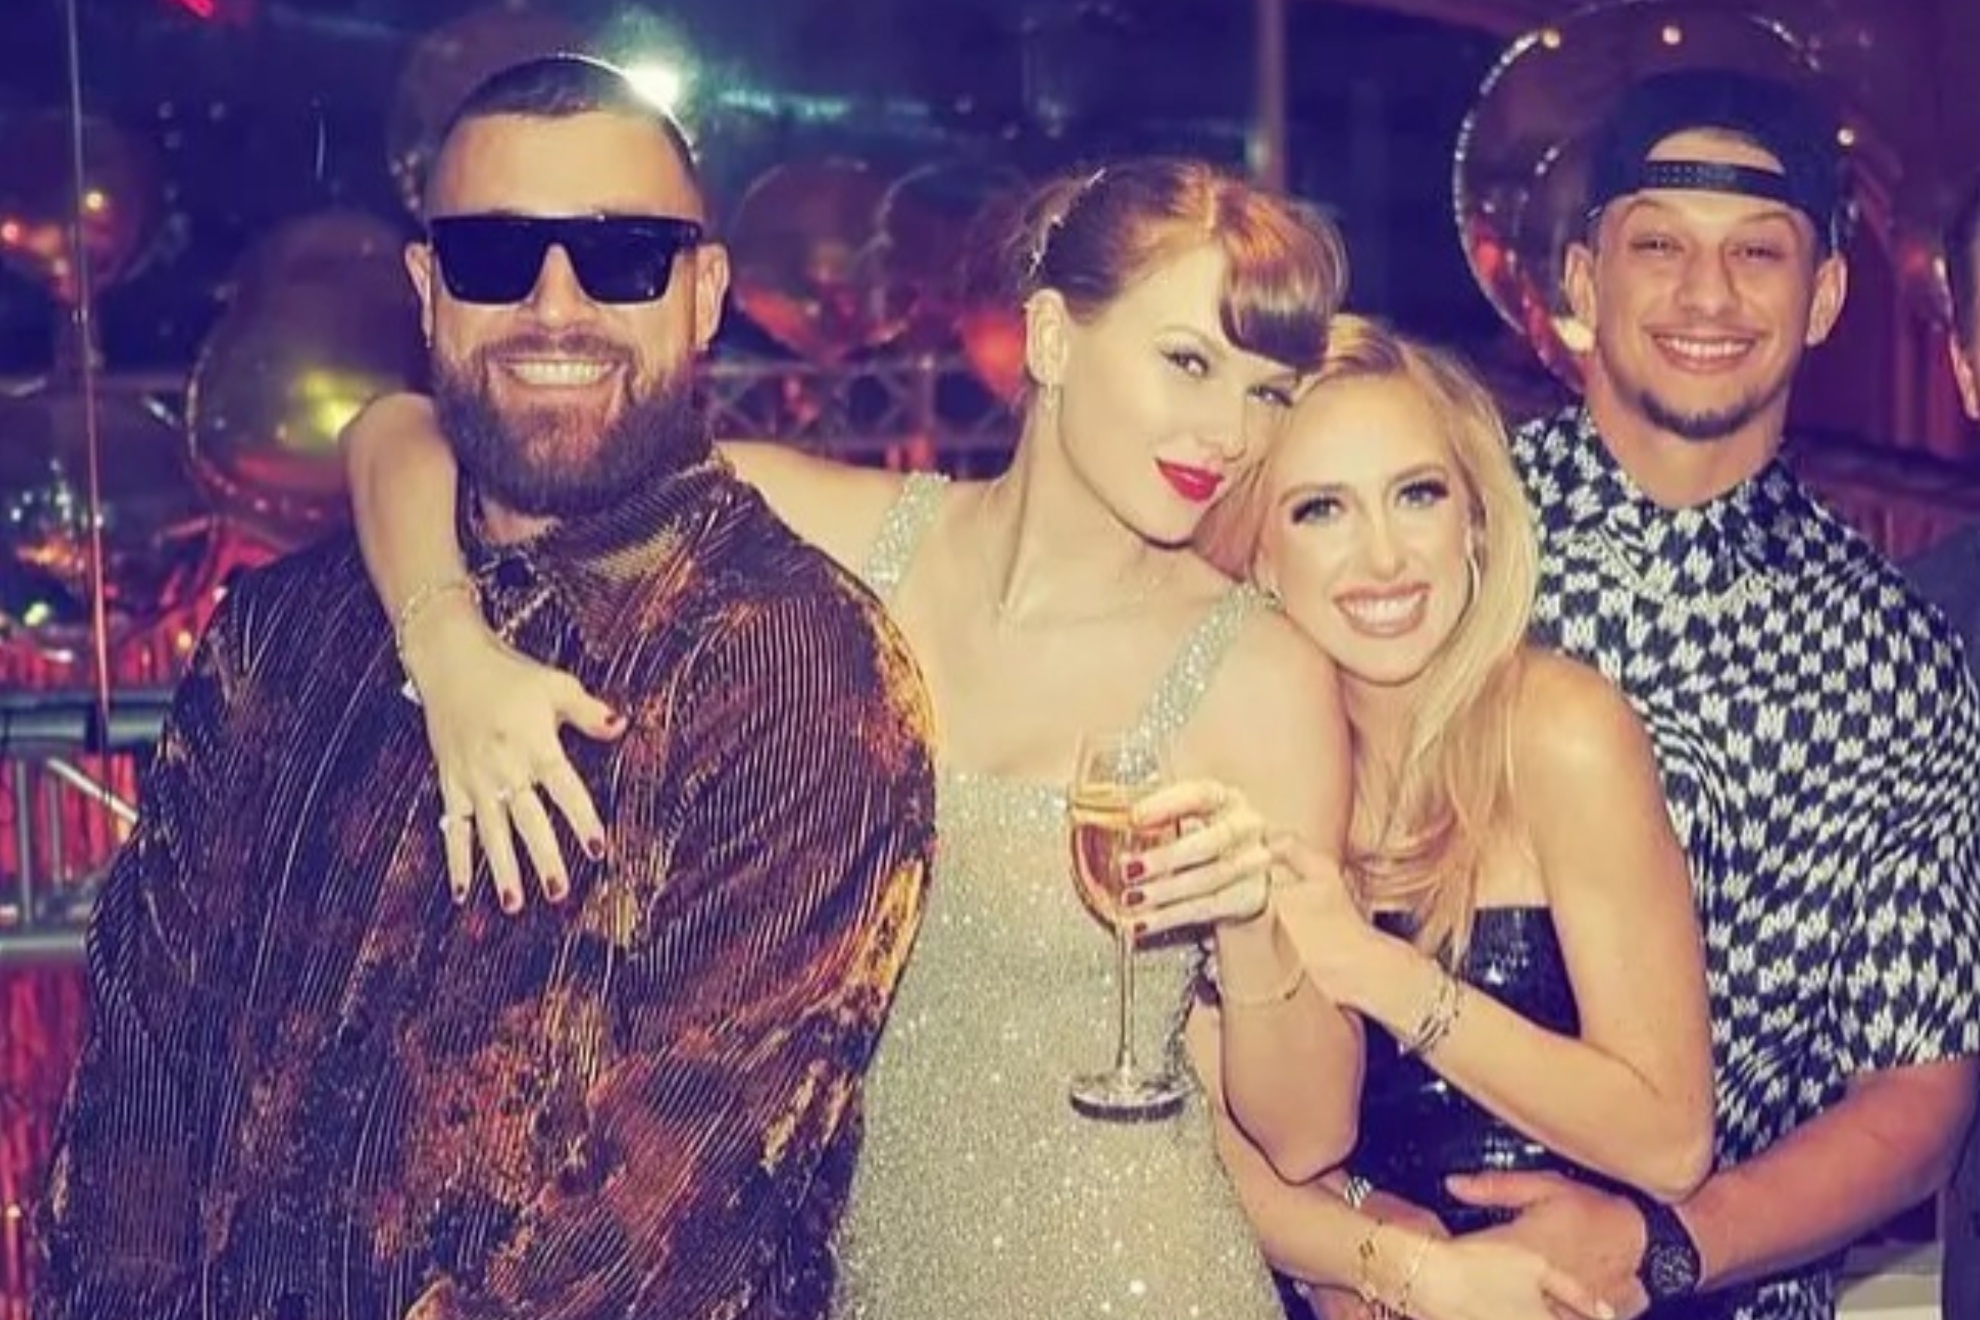 From left: Travis Kelce, Taylor Swift, Brittany Mahomes, and Patrick Mahomes partying in Las Vegas.